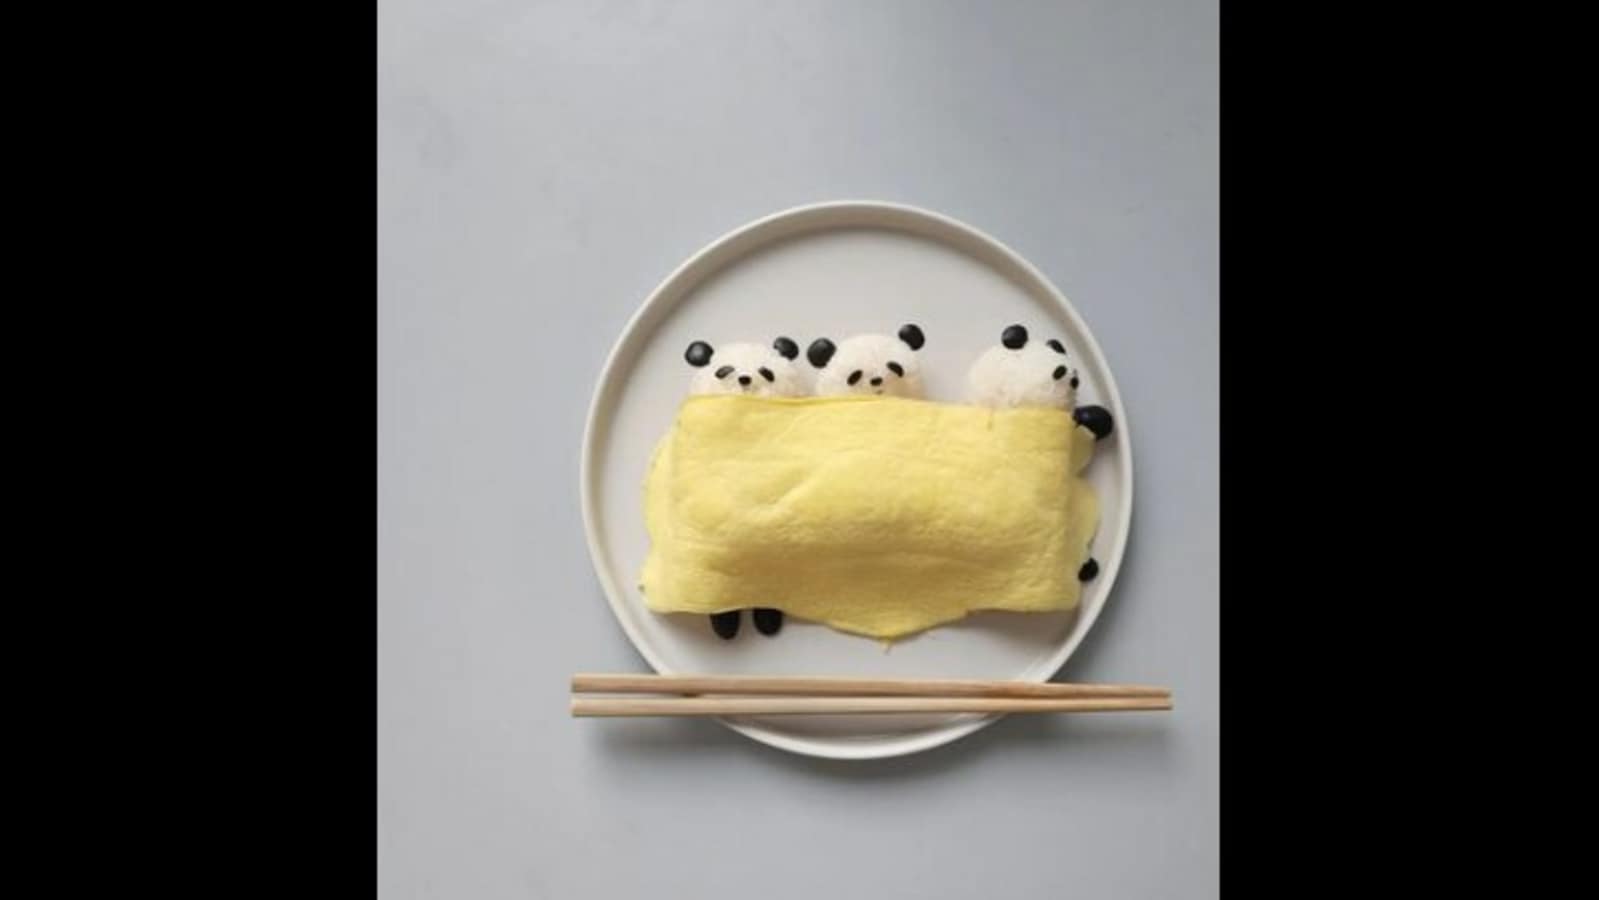 Artist Creates An Adorable Looking Panda In A Blanket With Rice And